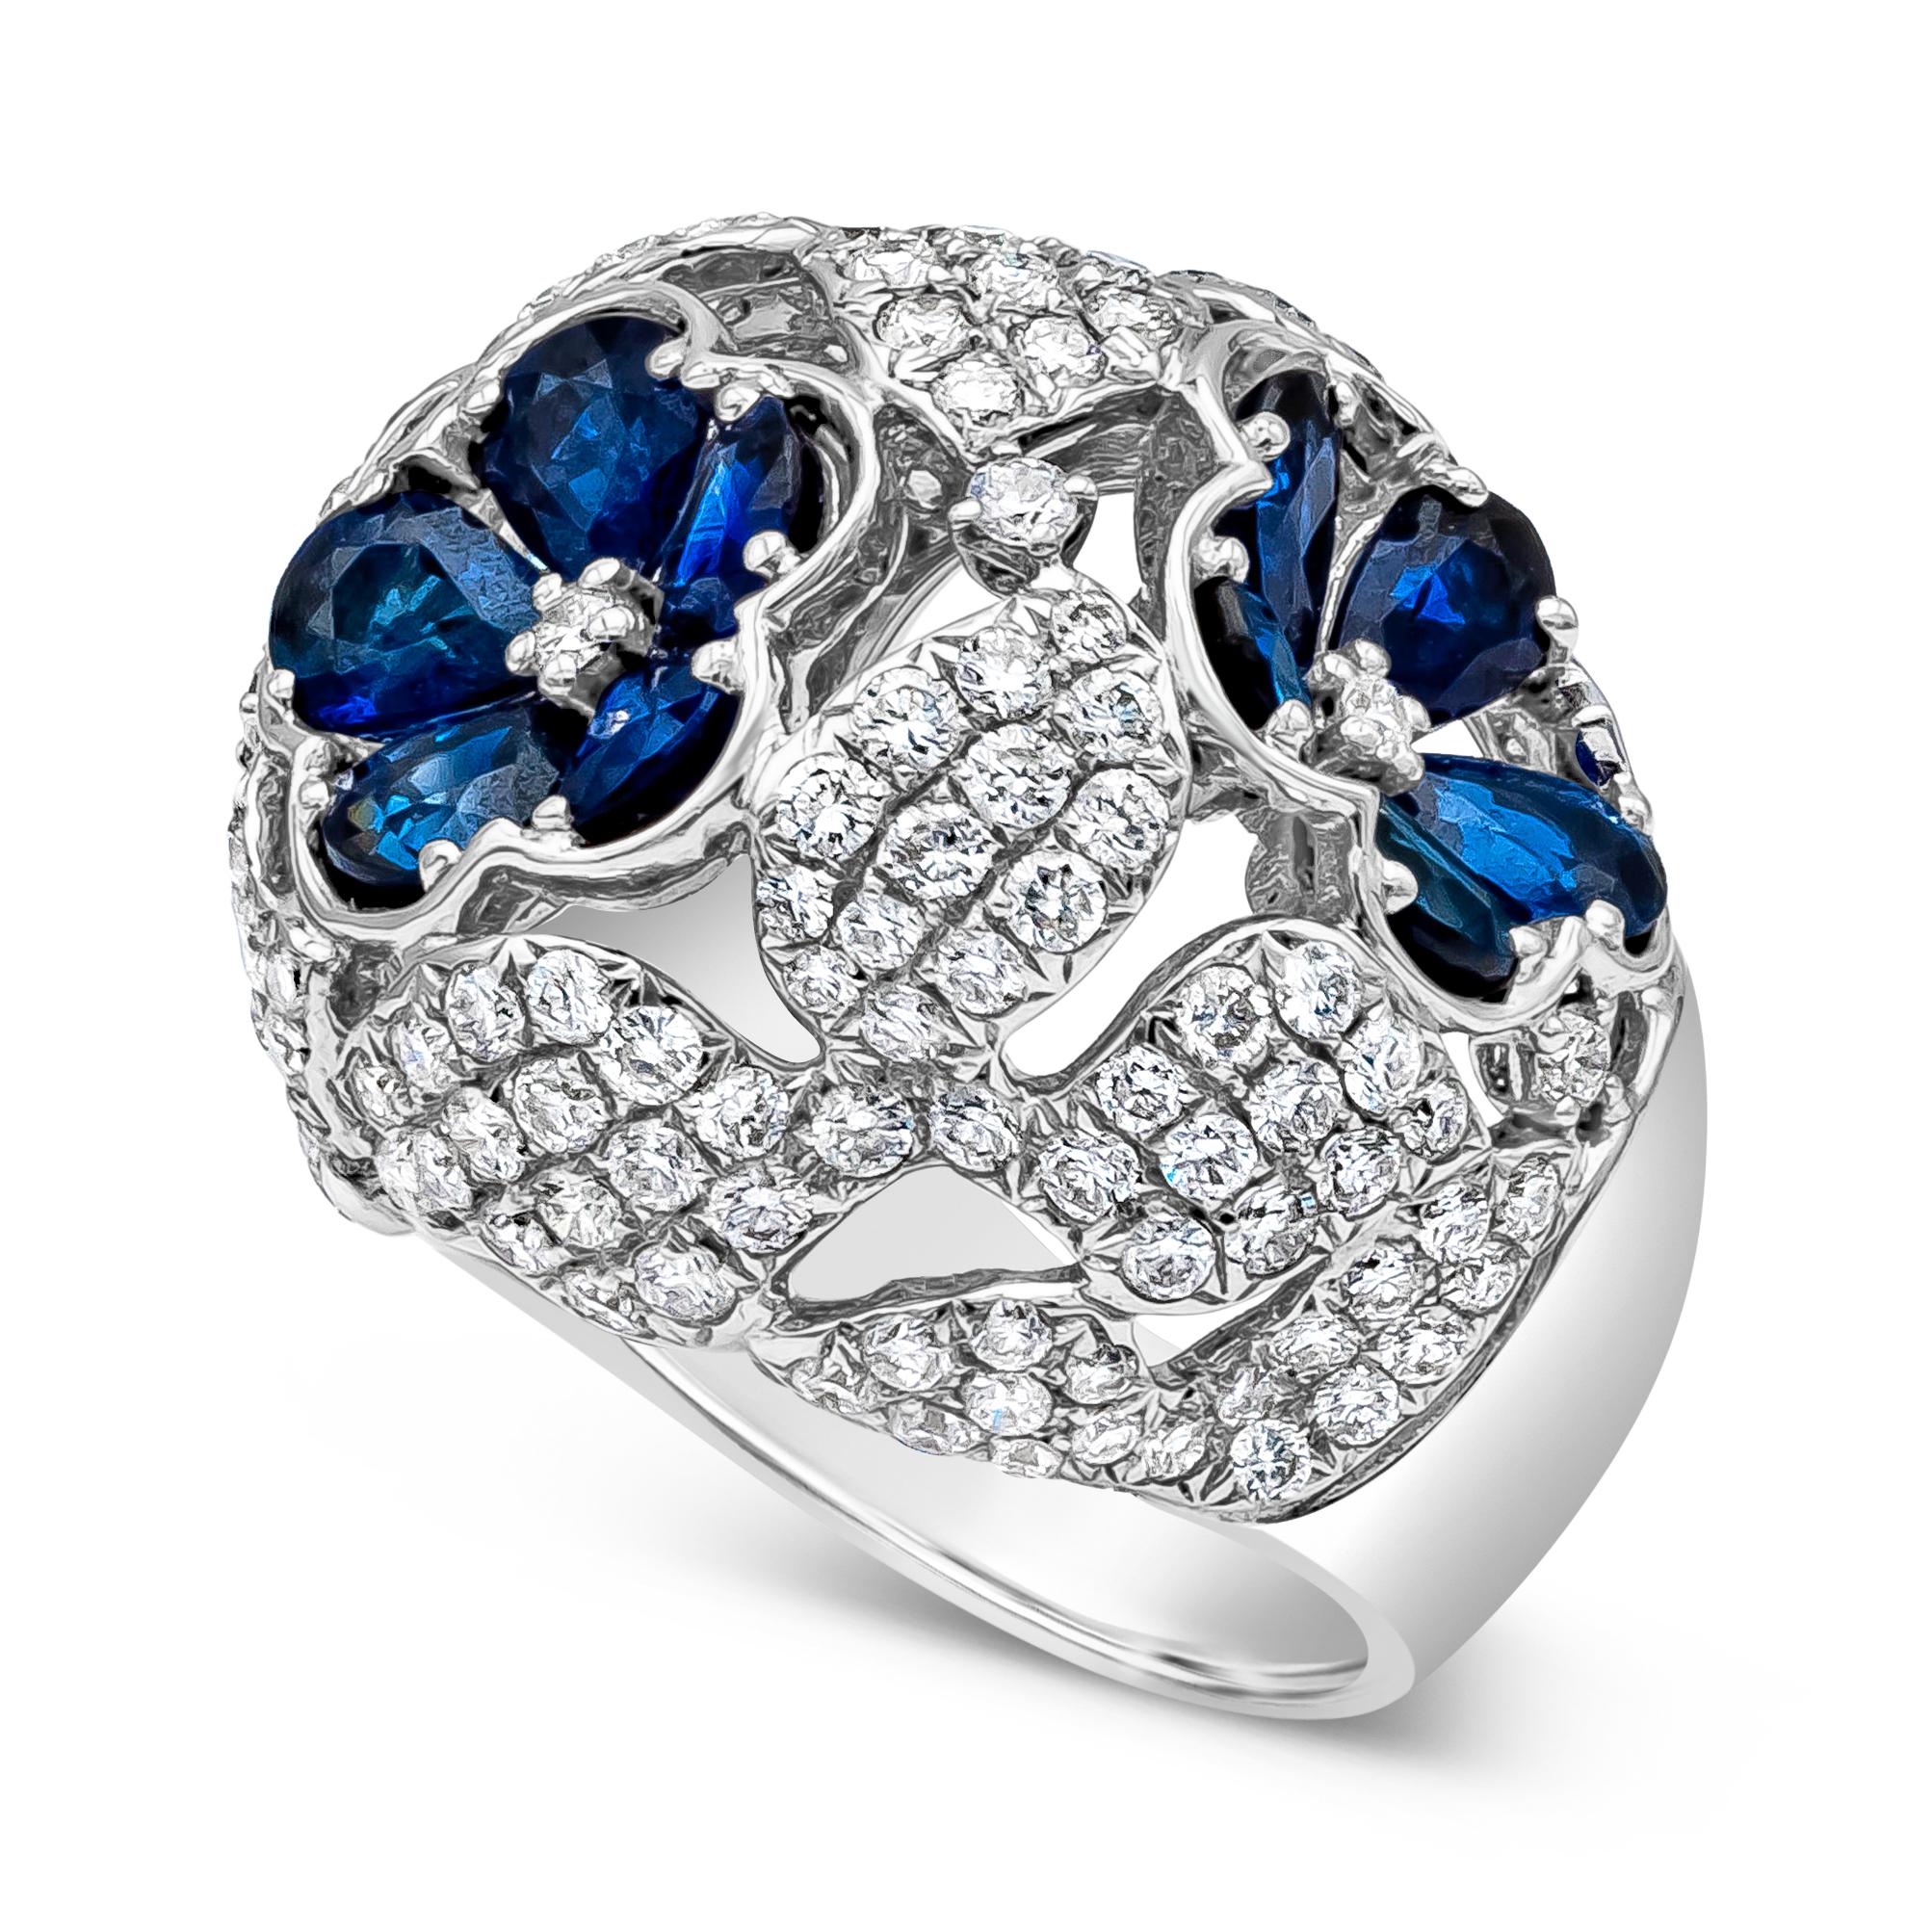 Contemporary Roman Malakov 8.11 Carats Total Blue Sapphire and Round Diamonds Fashion Ring For Sale